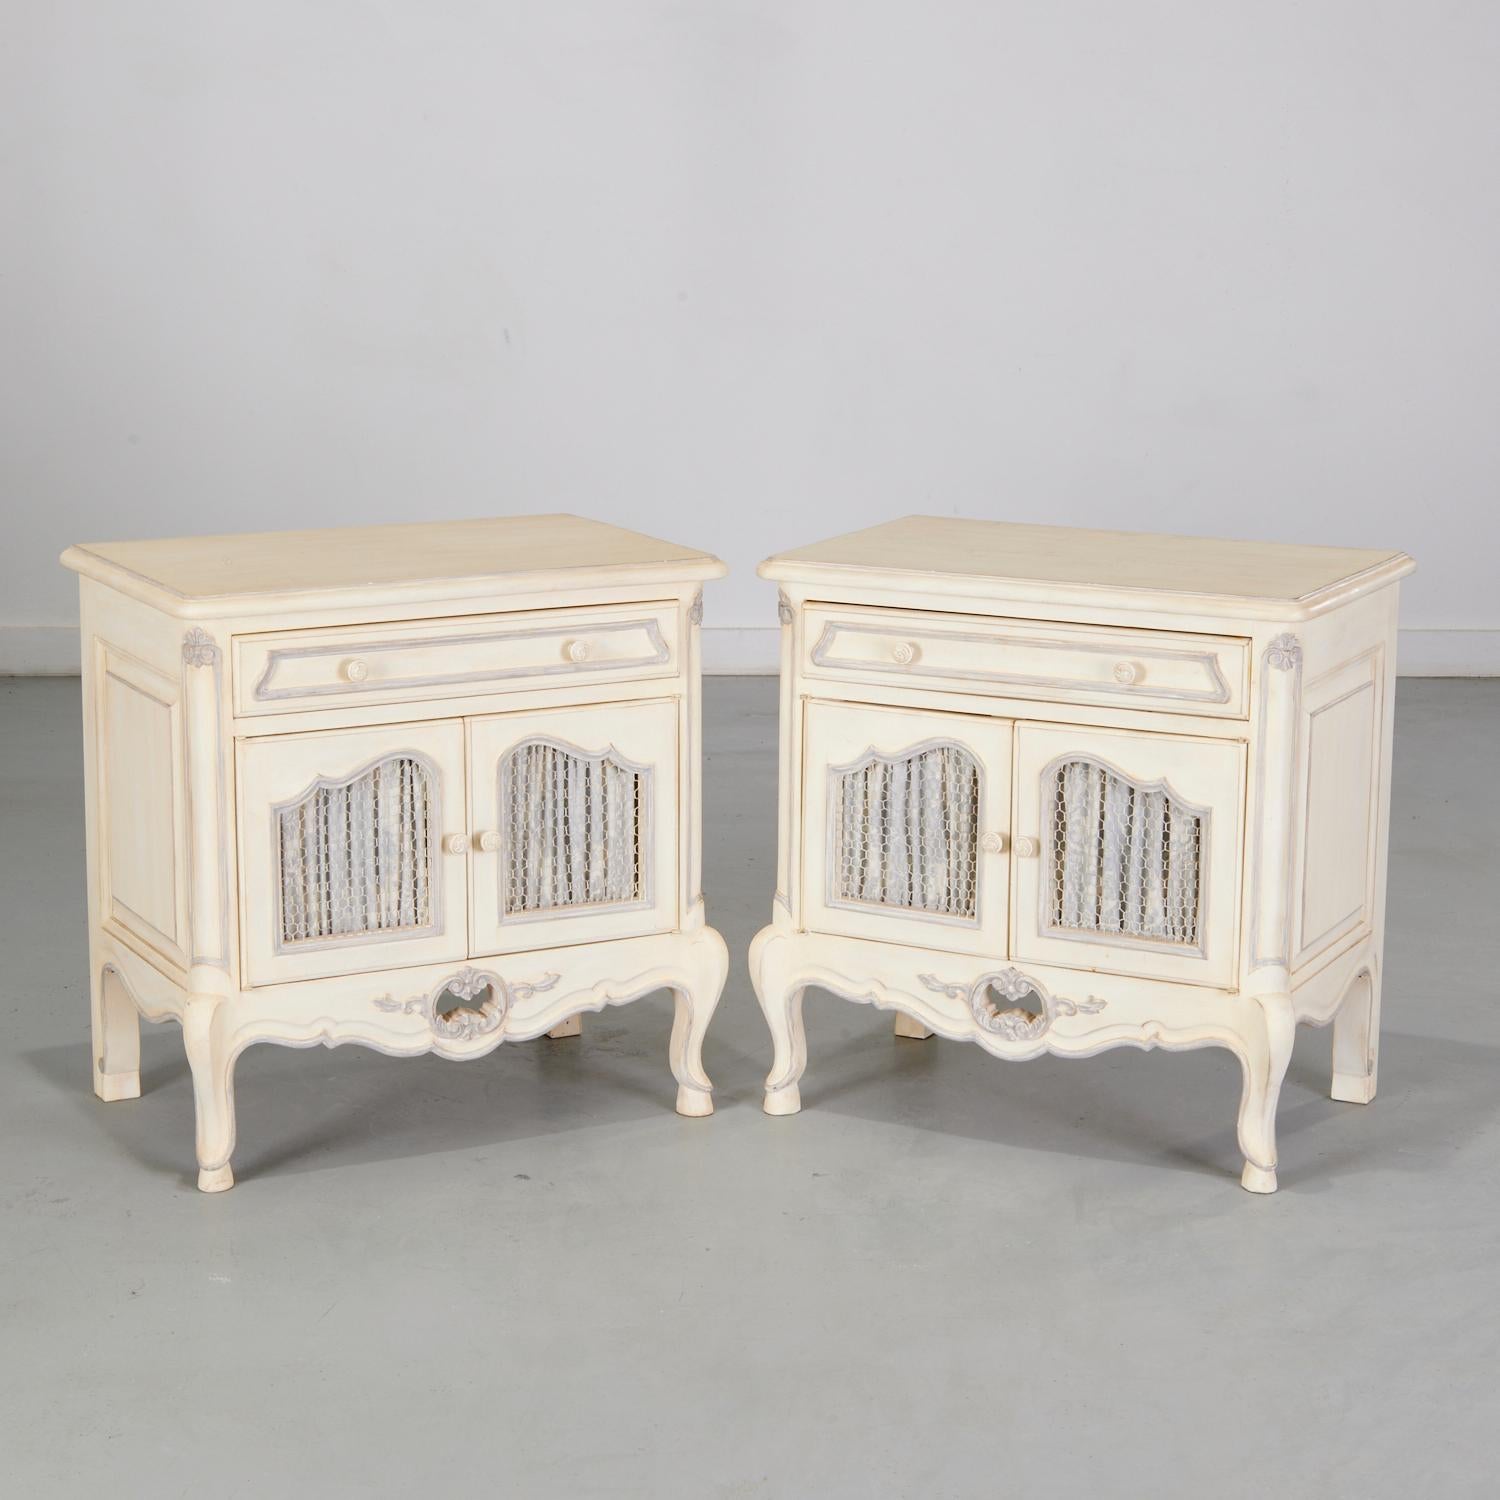 20th c. Pair of Louis XV Style Painted Nightstands with Fabric Door Lining For Sale 5